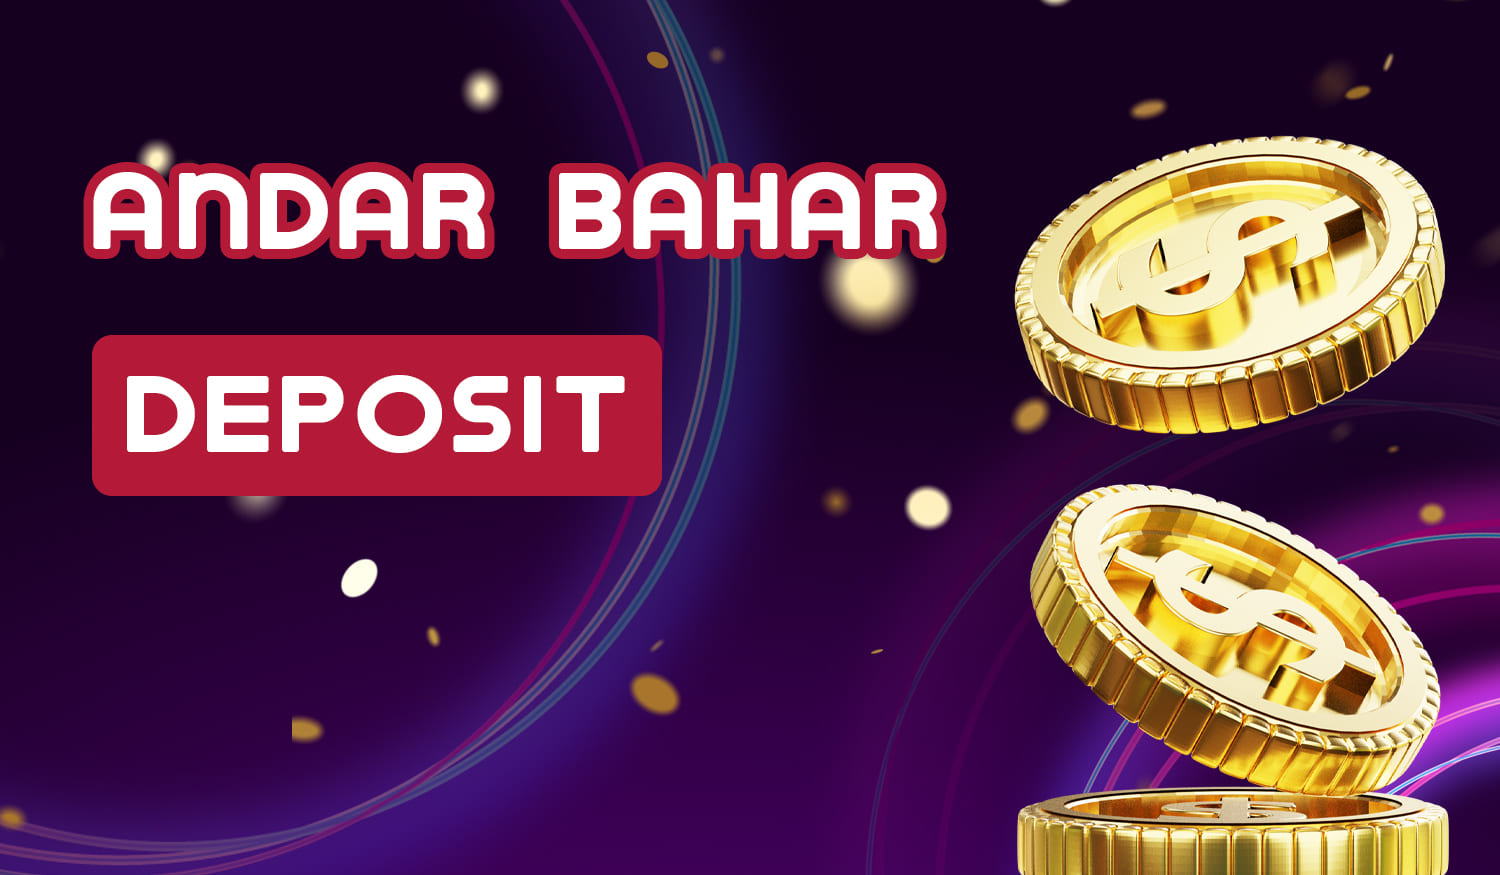 What methods and amounts Indian users can deposit to play Andar Bahar online